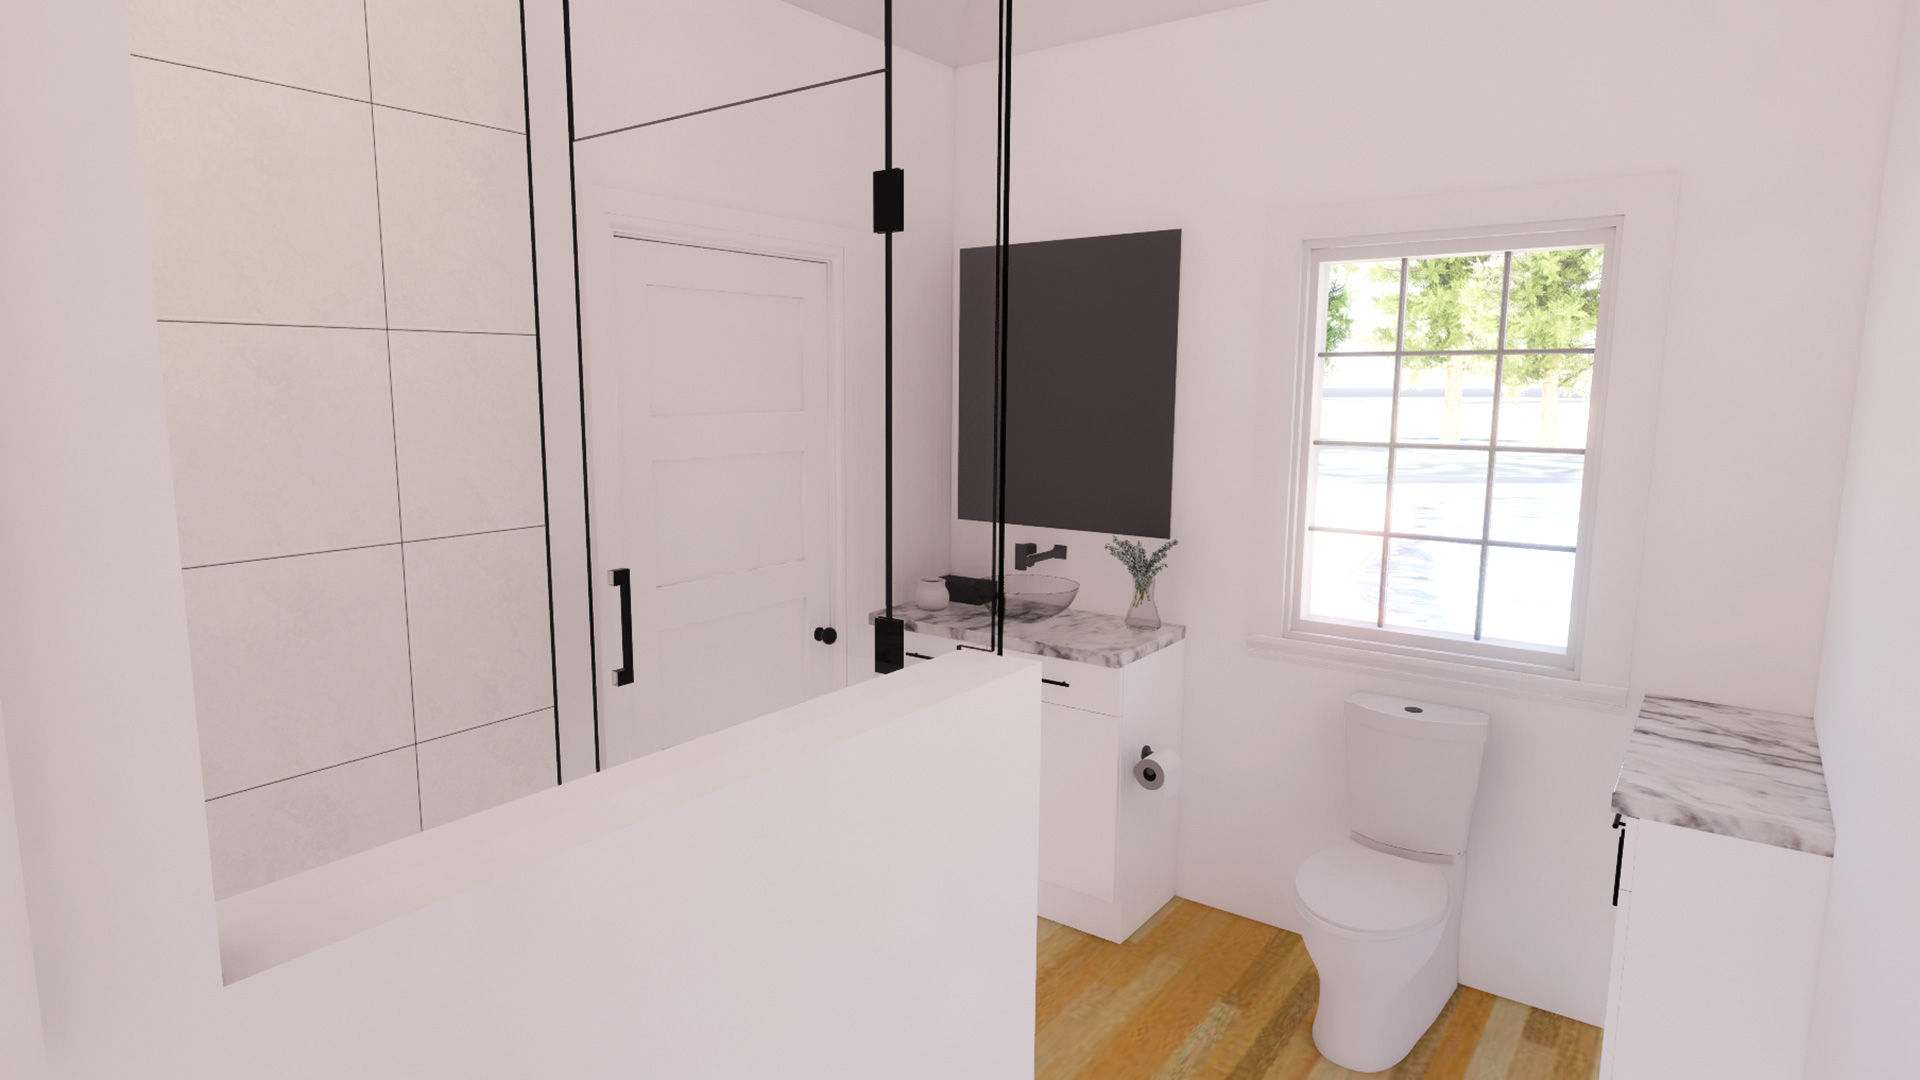 New bathroom, with bright white tile and glass shower walls and door